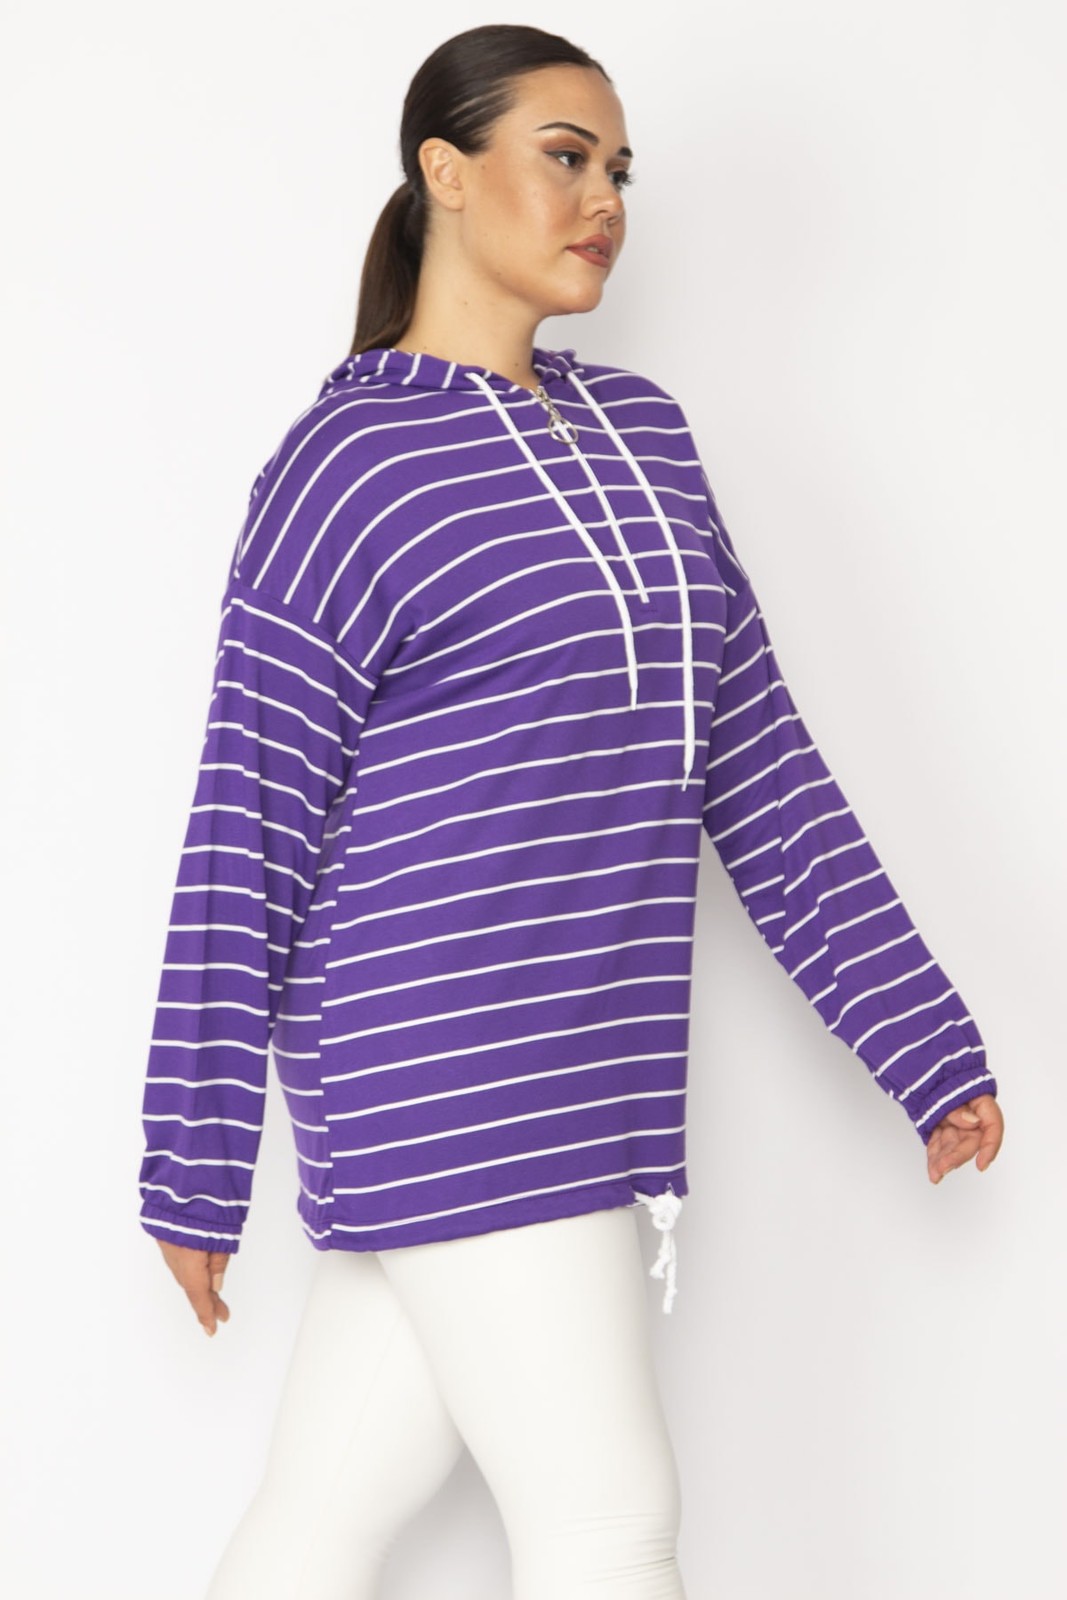 Şans Women's Plus Size Purple Front Pat with Zipper Eyelets and Lace-Up Detail, Hooded Striped Tunic